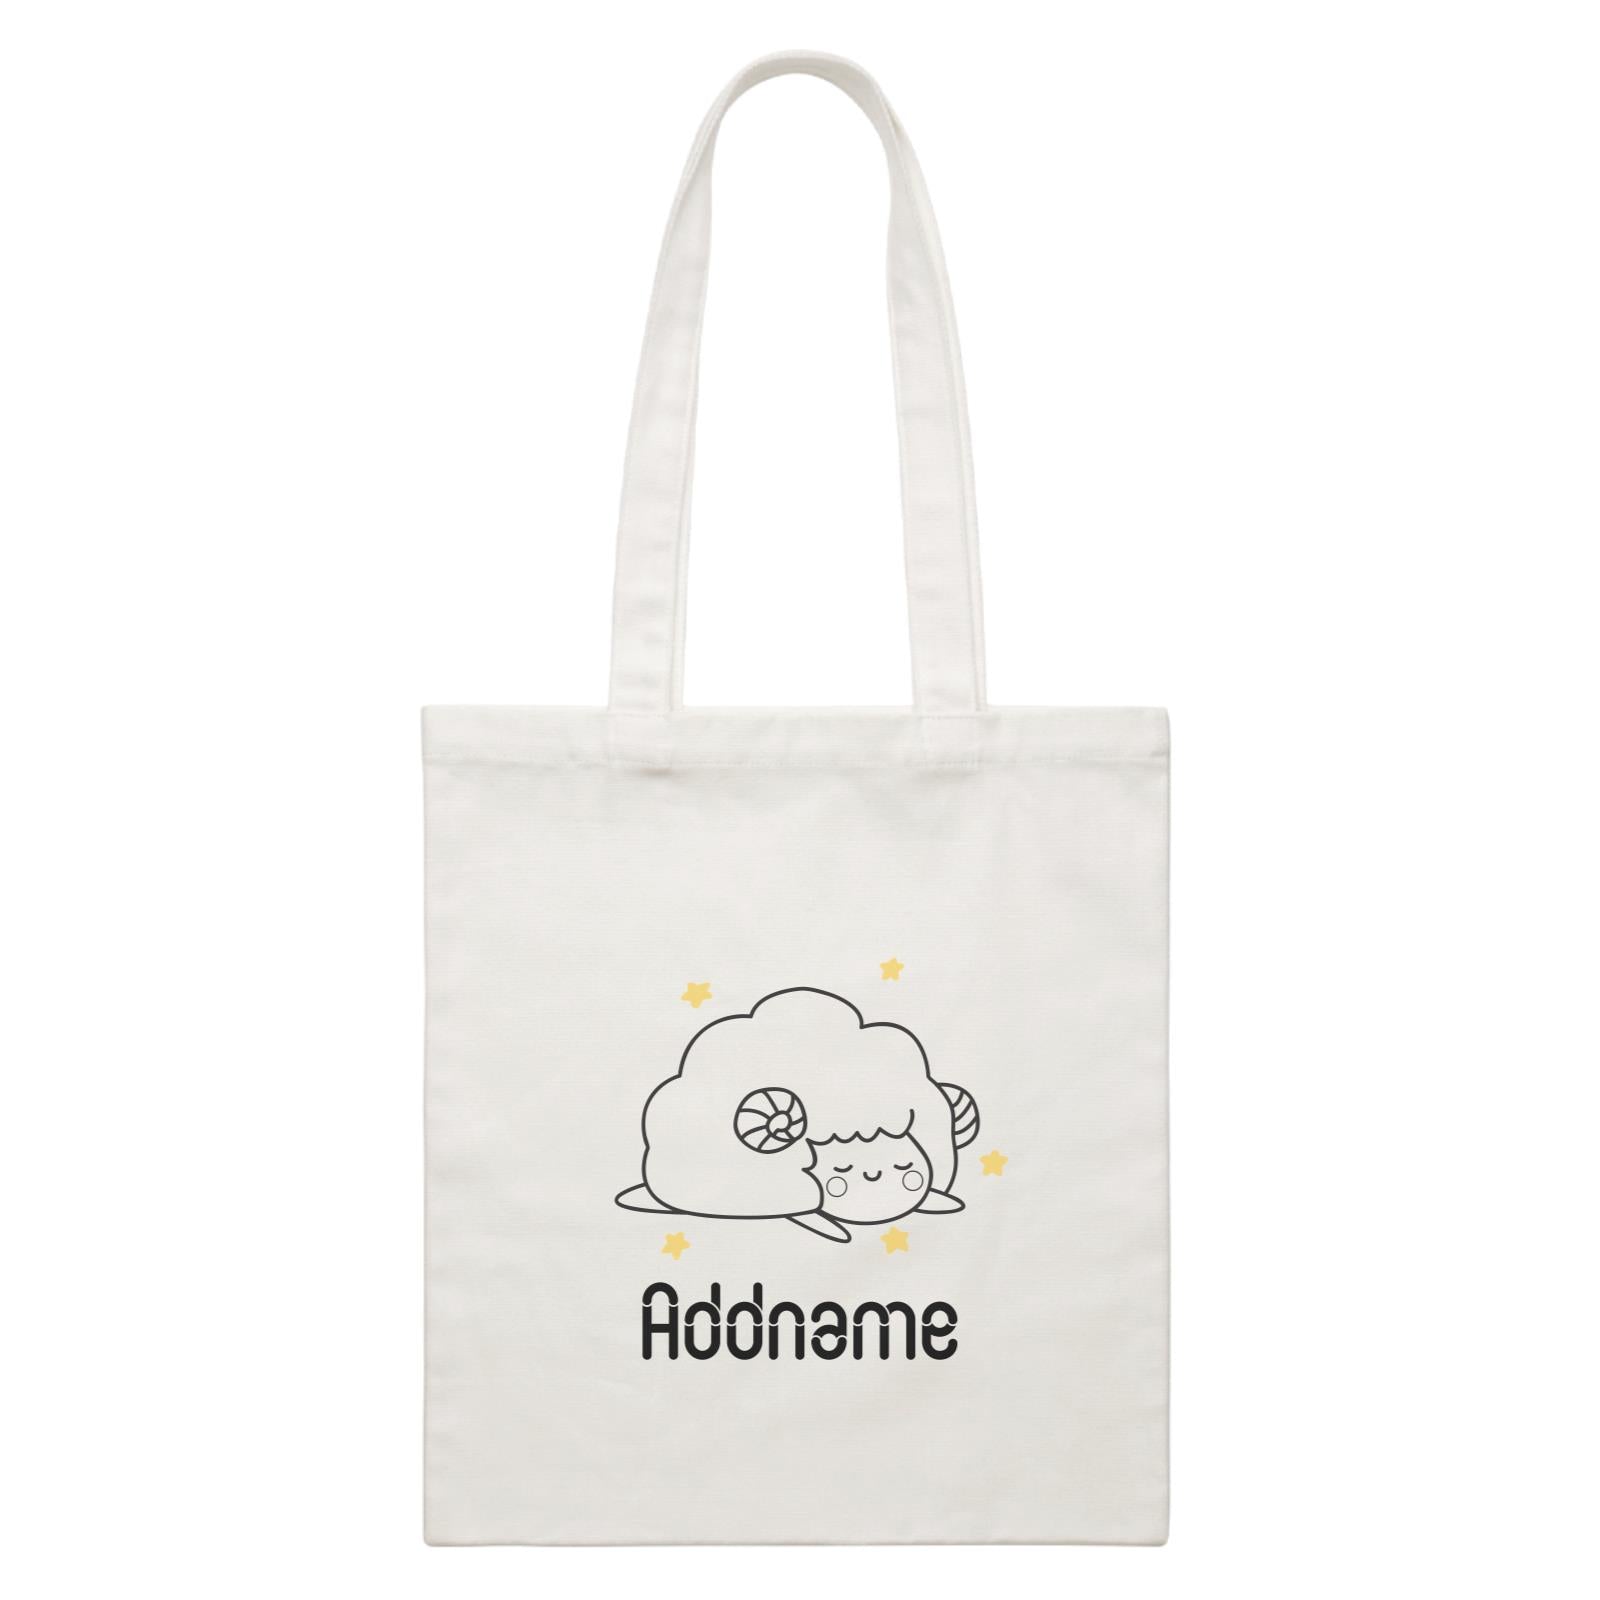 Coloring Outline Cute Hand Drawn Animals Farm Sheep Addname White White Canvas Bag